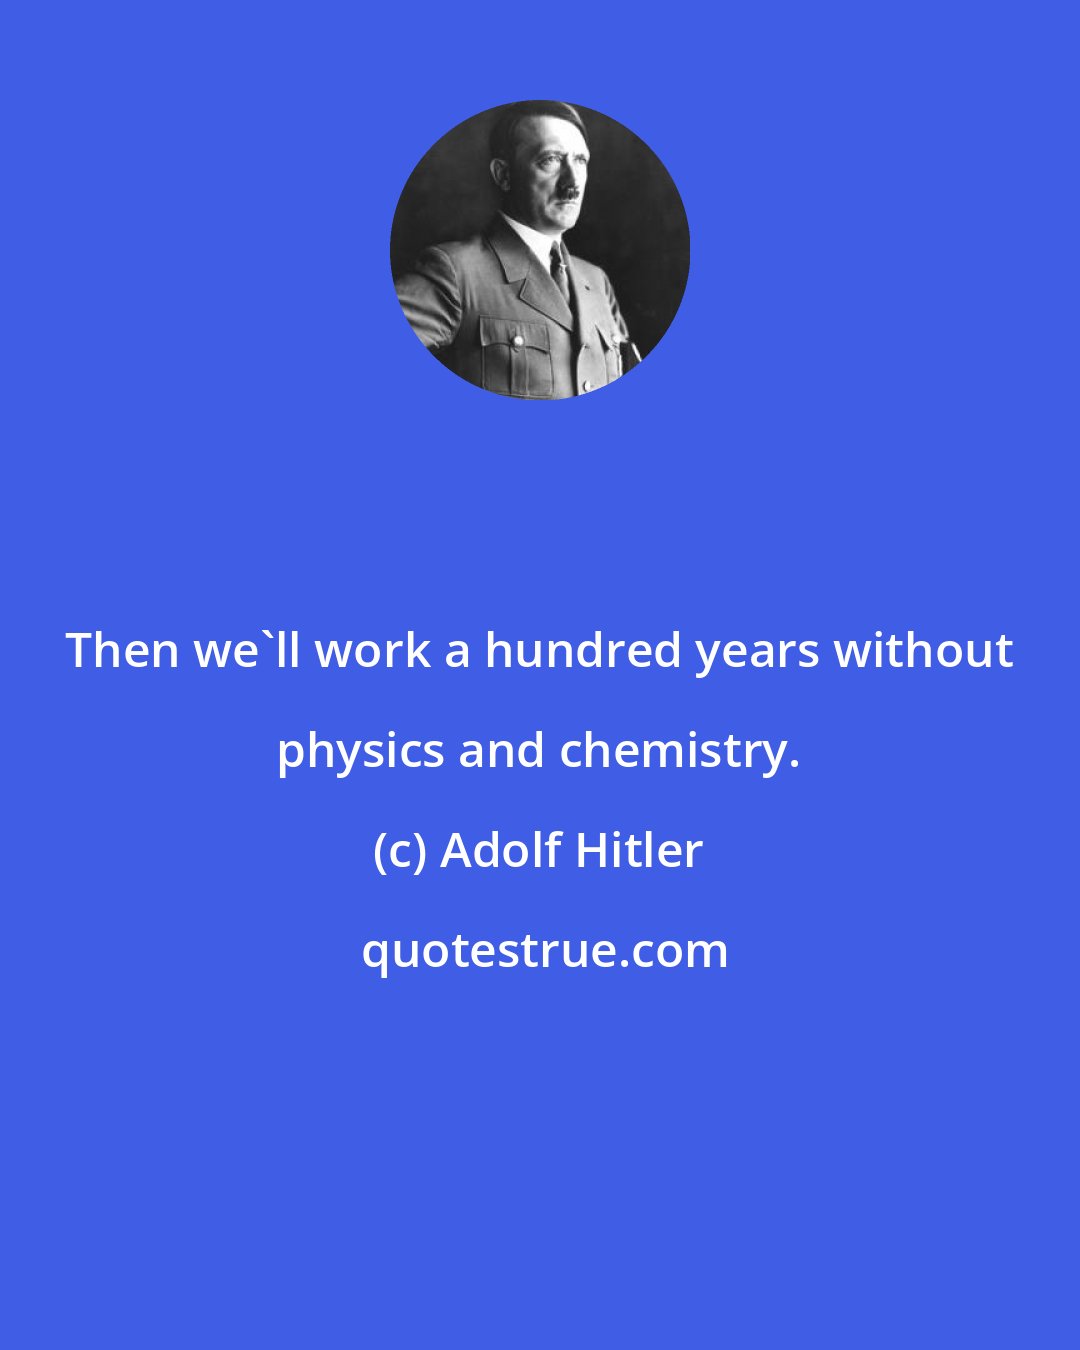 Adolf Hitler: Then we'll work a hundred years without physics and chemistry.